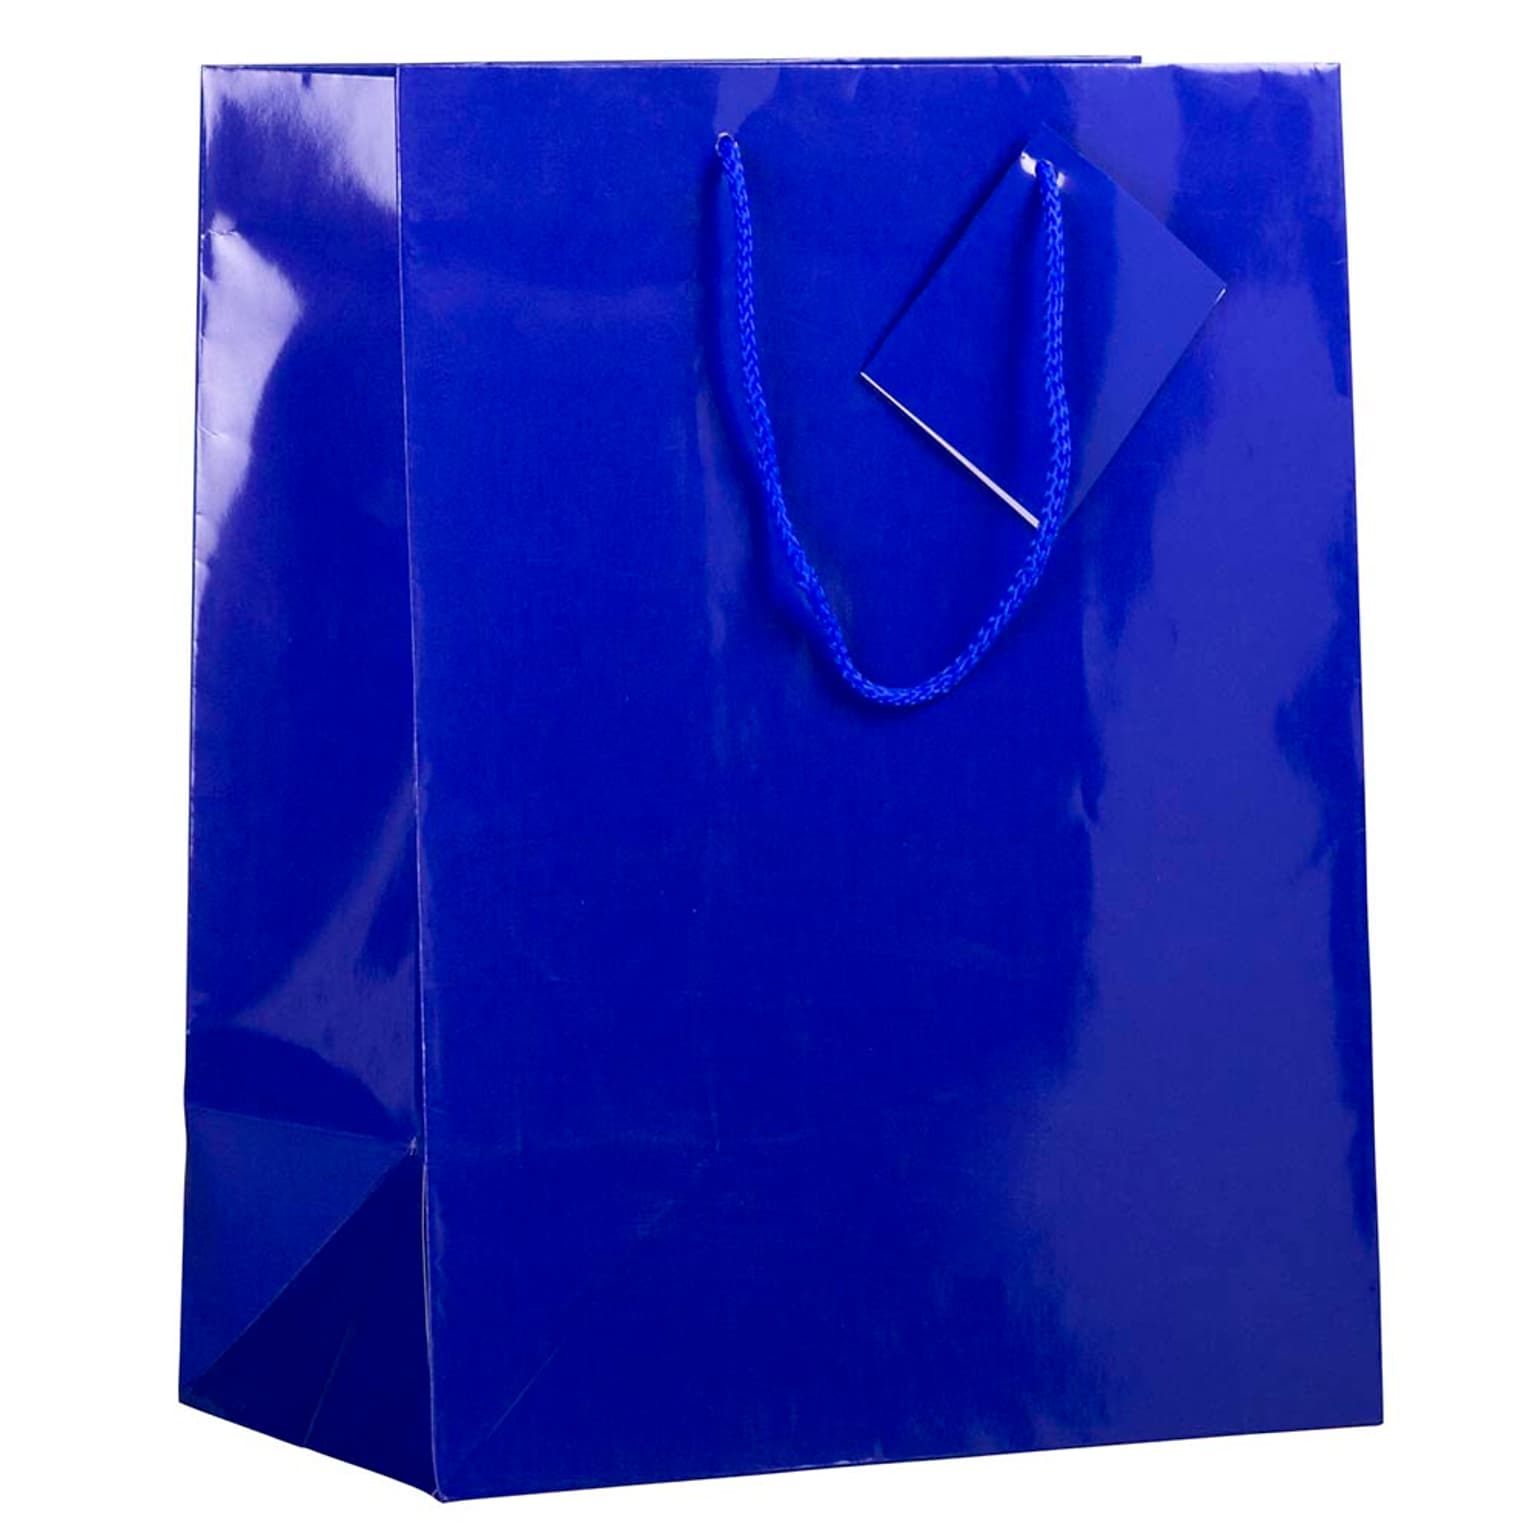 JAM Paper Glossy Gift Bag with Rope Handles, Large, Blue, 3 Bags/Pack (673GLBUB)